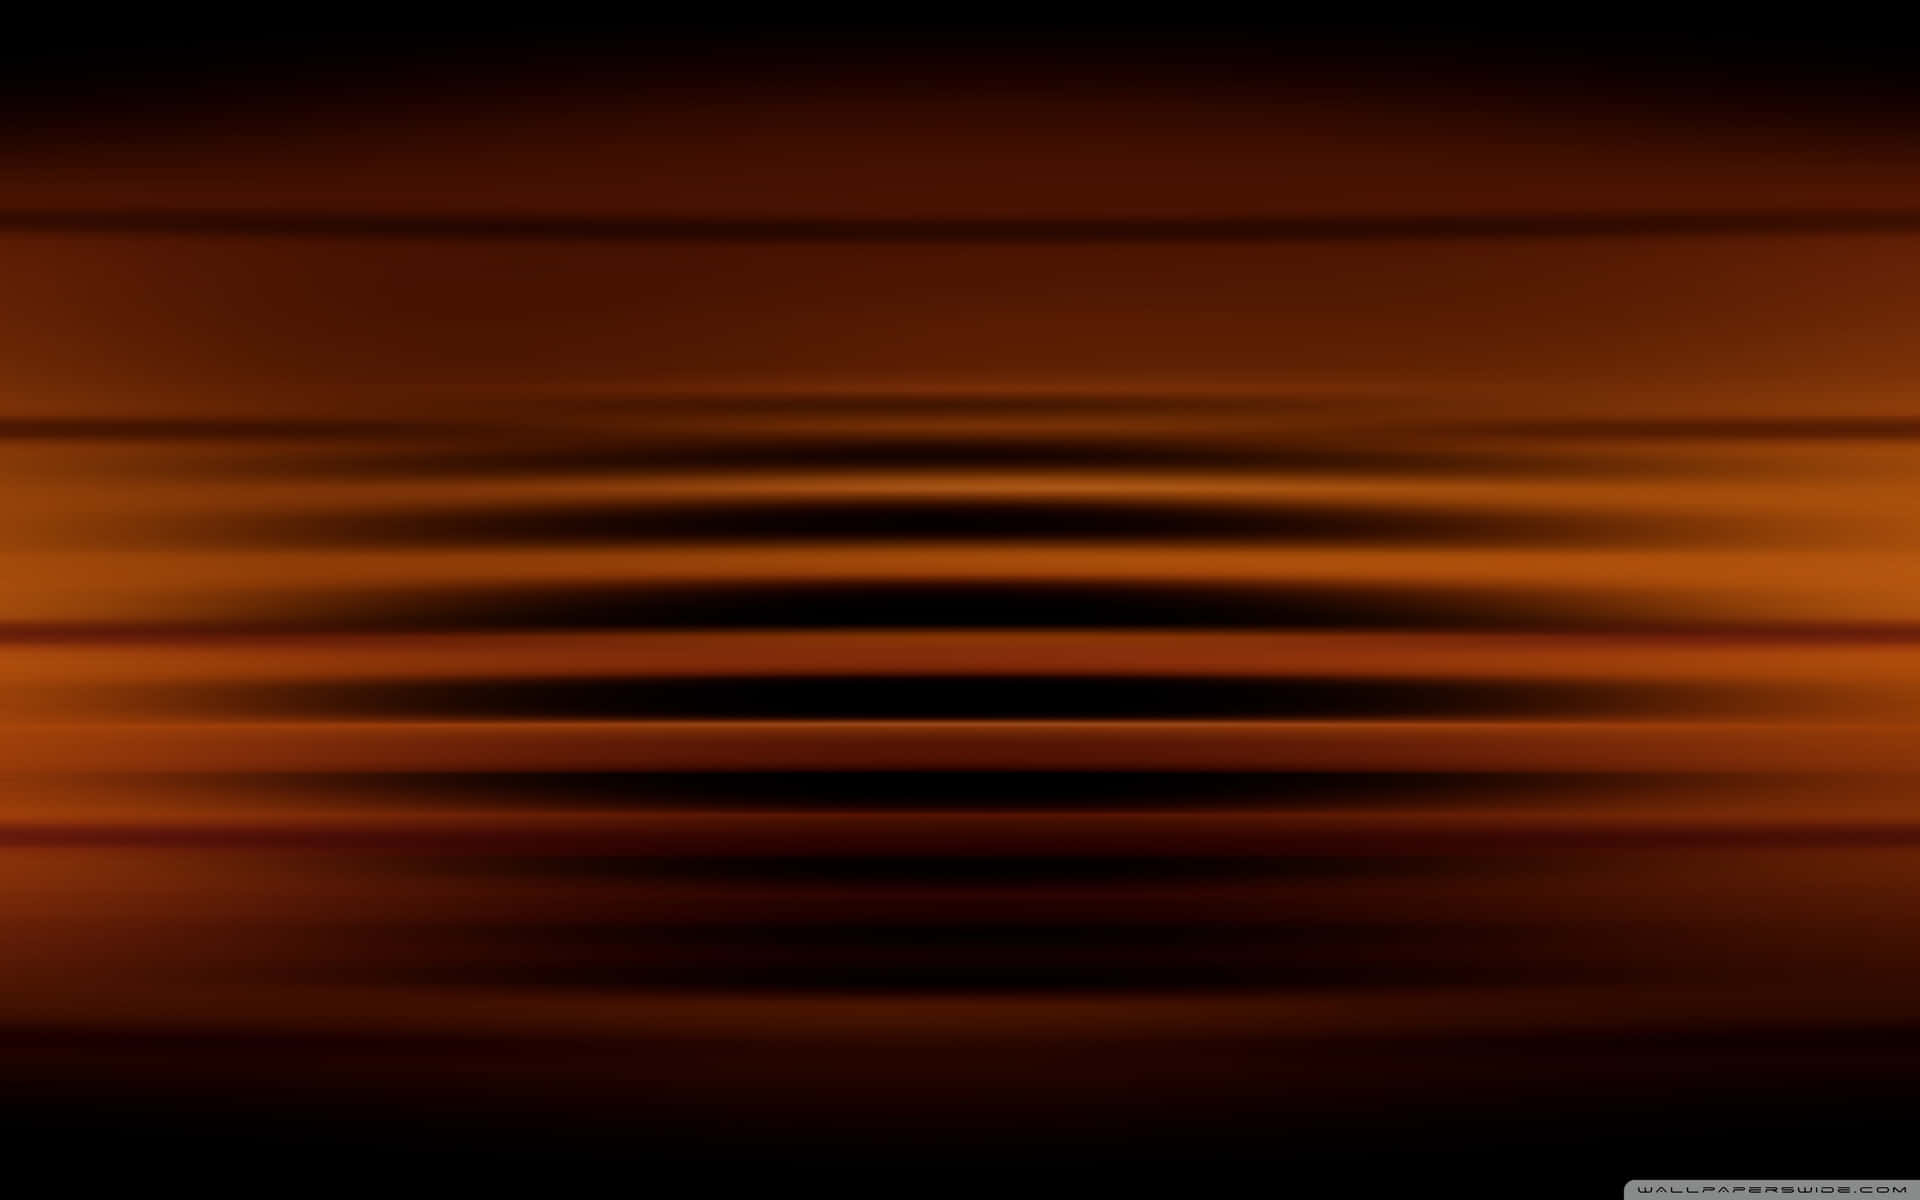 An Orange And Black Abstract Background